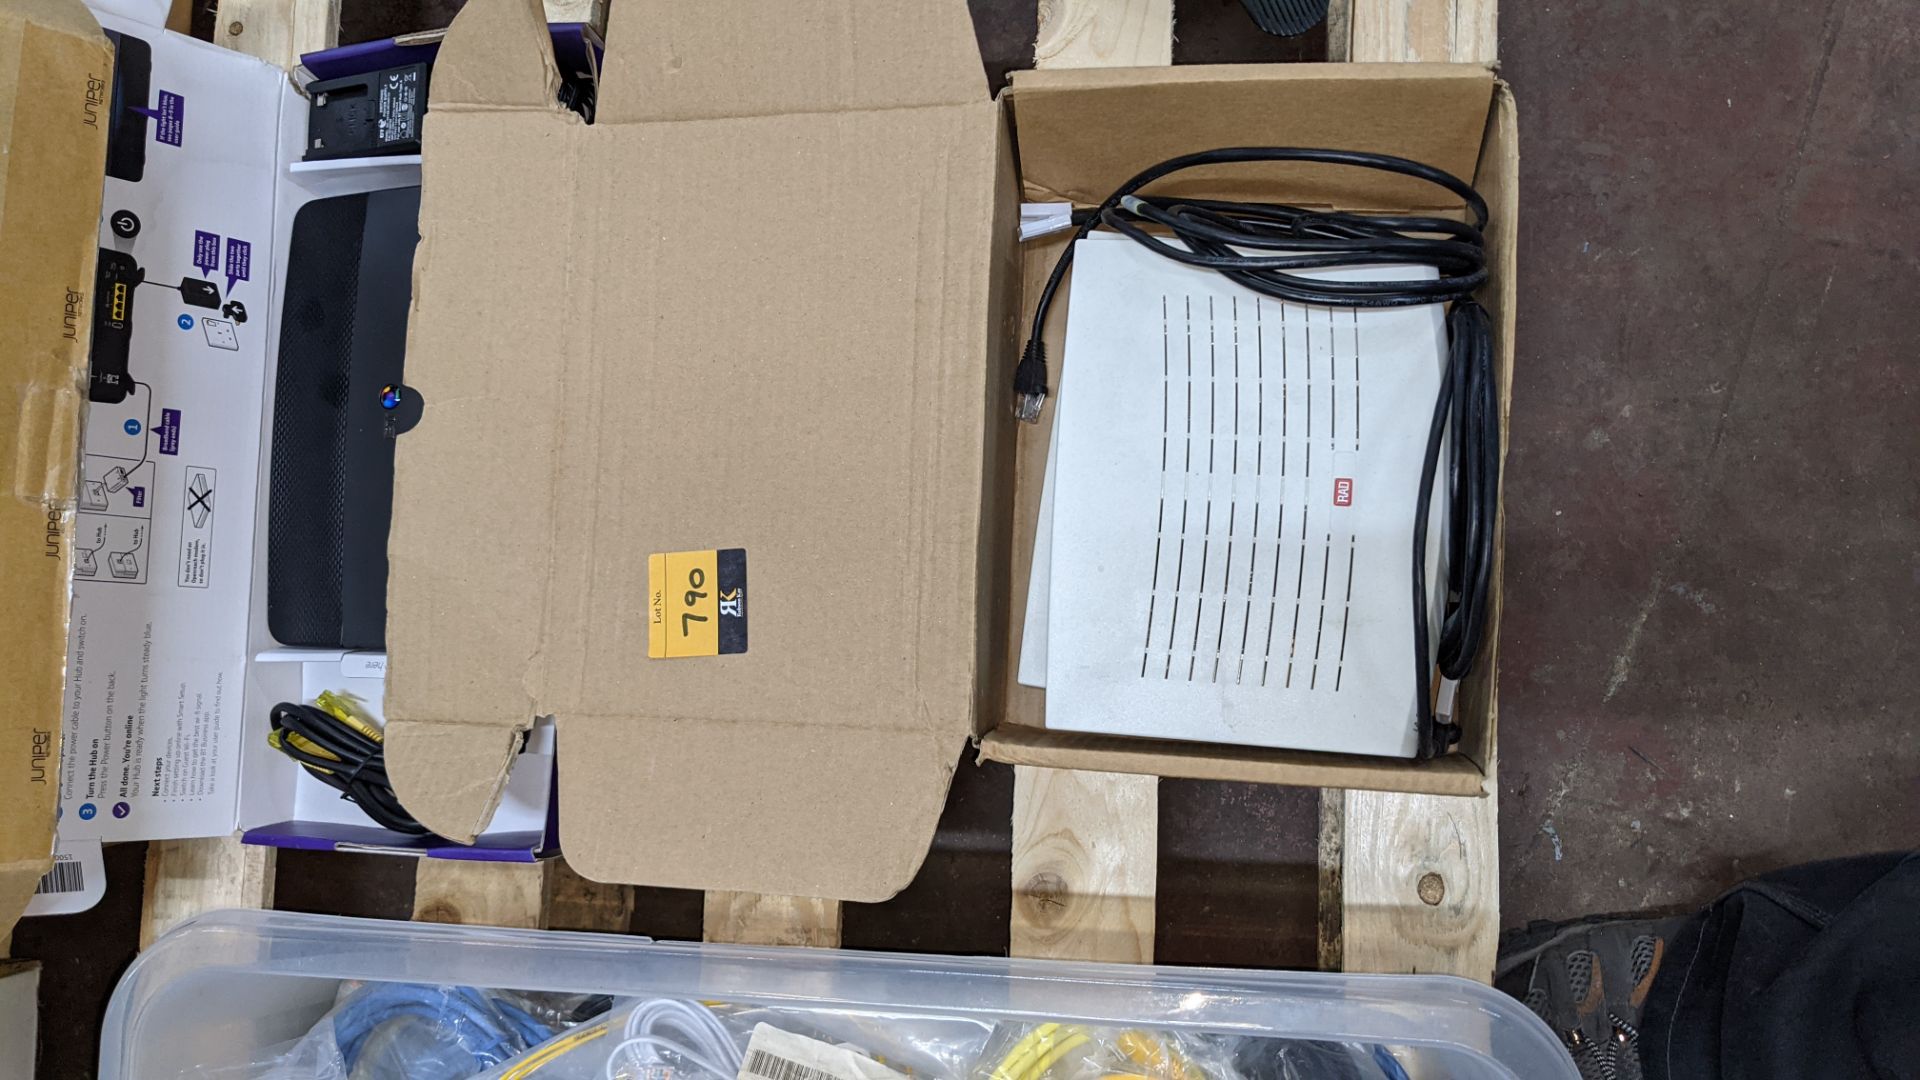 Contents of a pallet of assorted communications items including conference phones, cables, routers & - Image 5 of 9